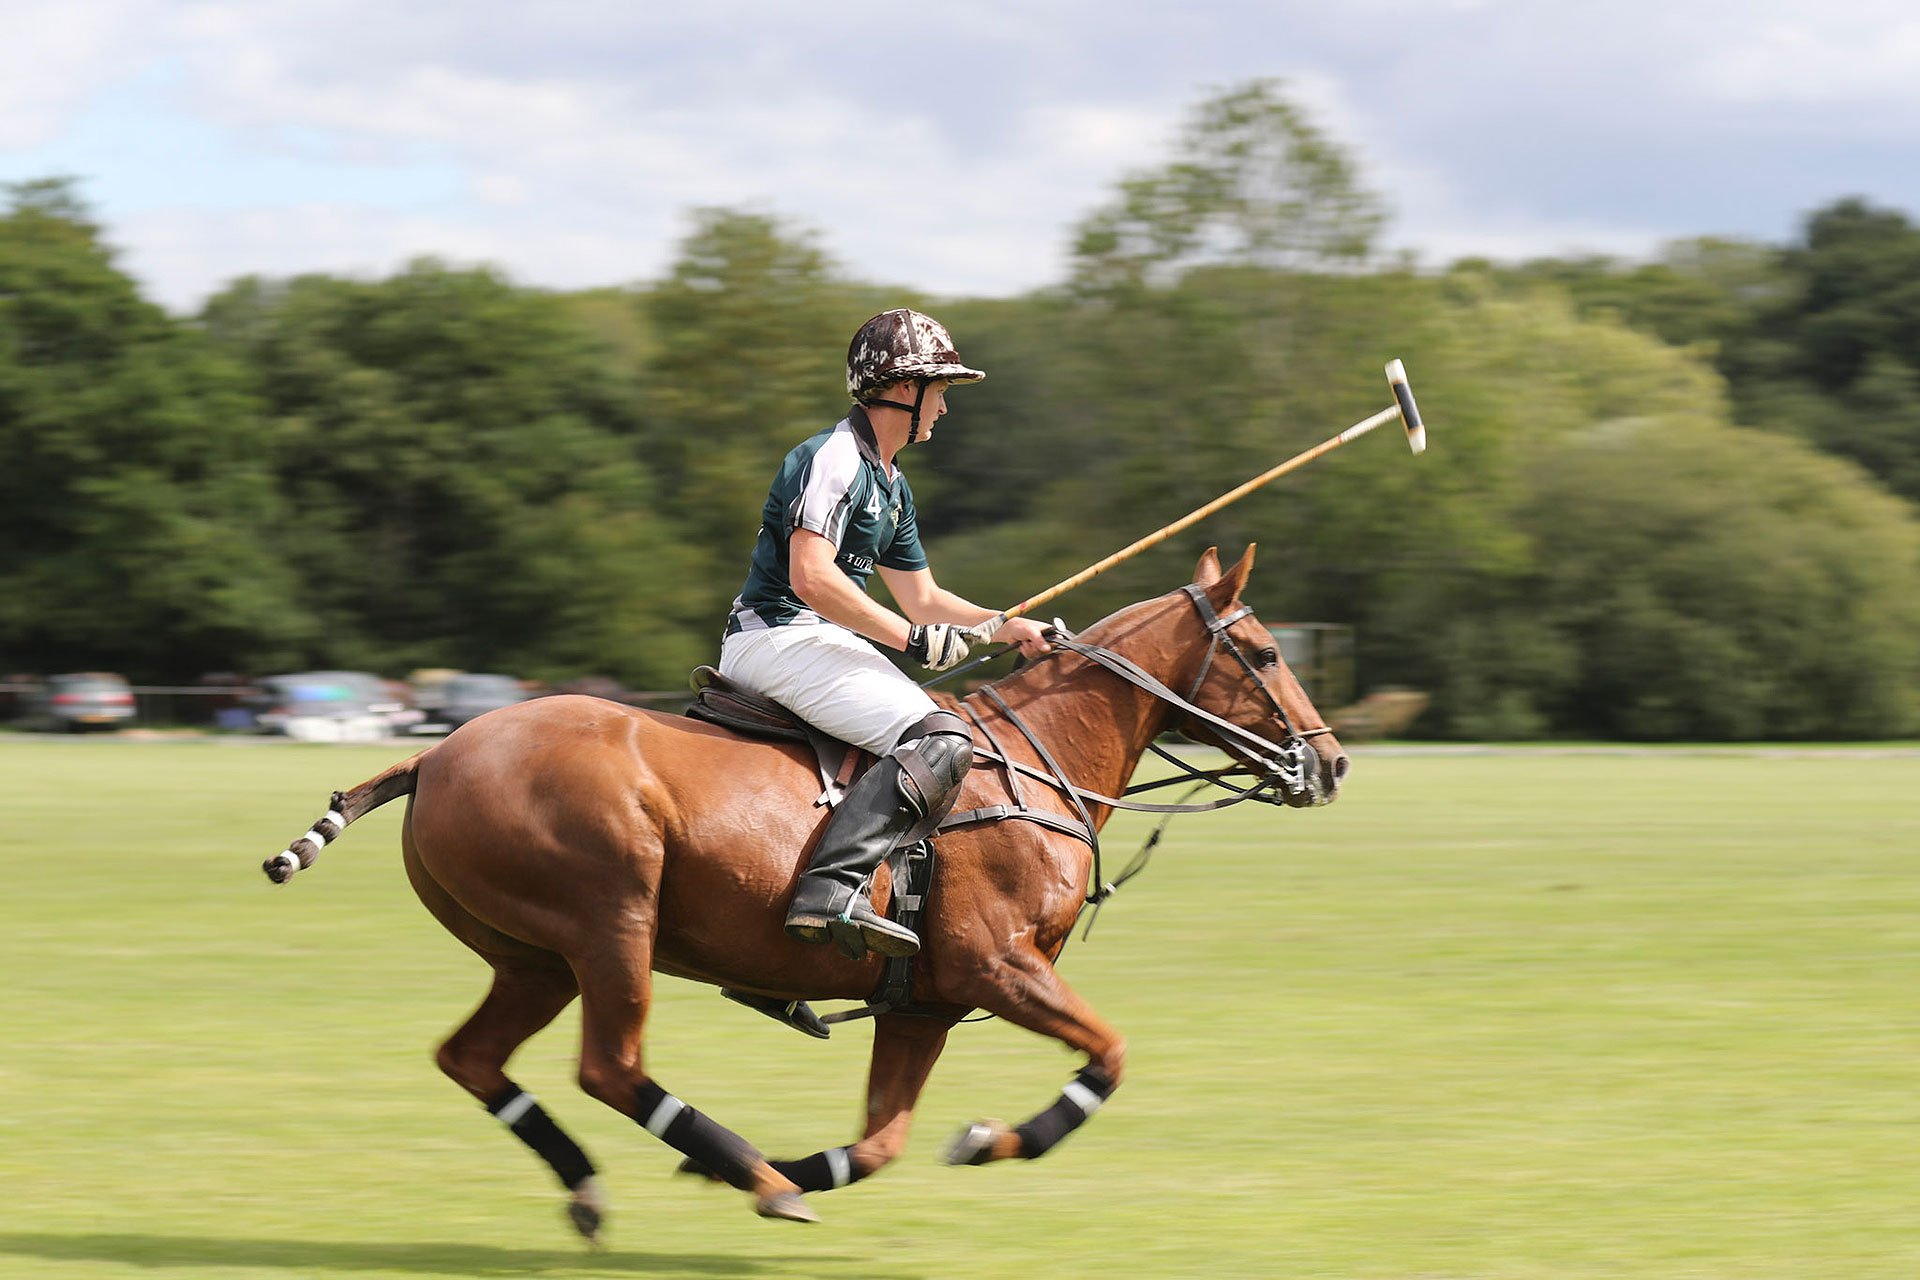 Polo in action at Hurtwood Park Polo Club